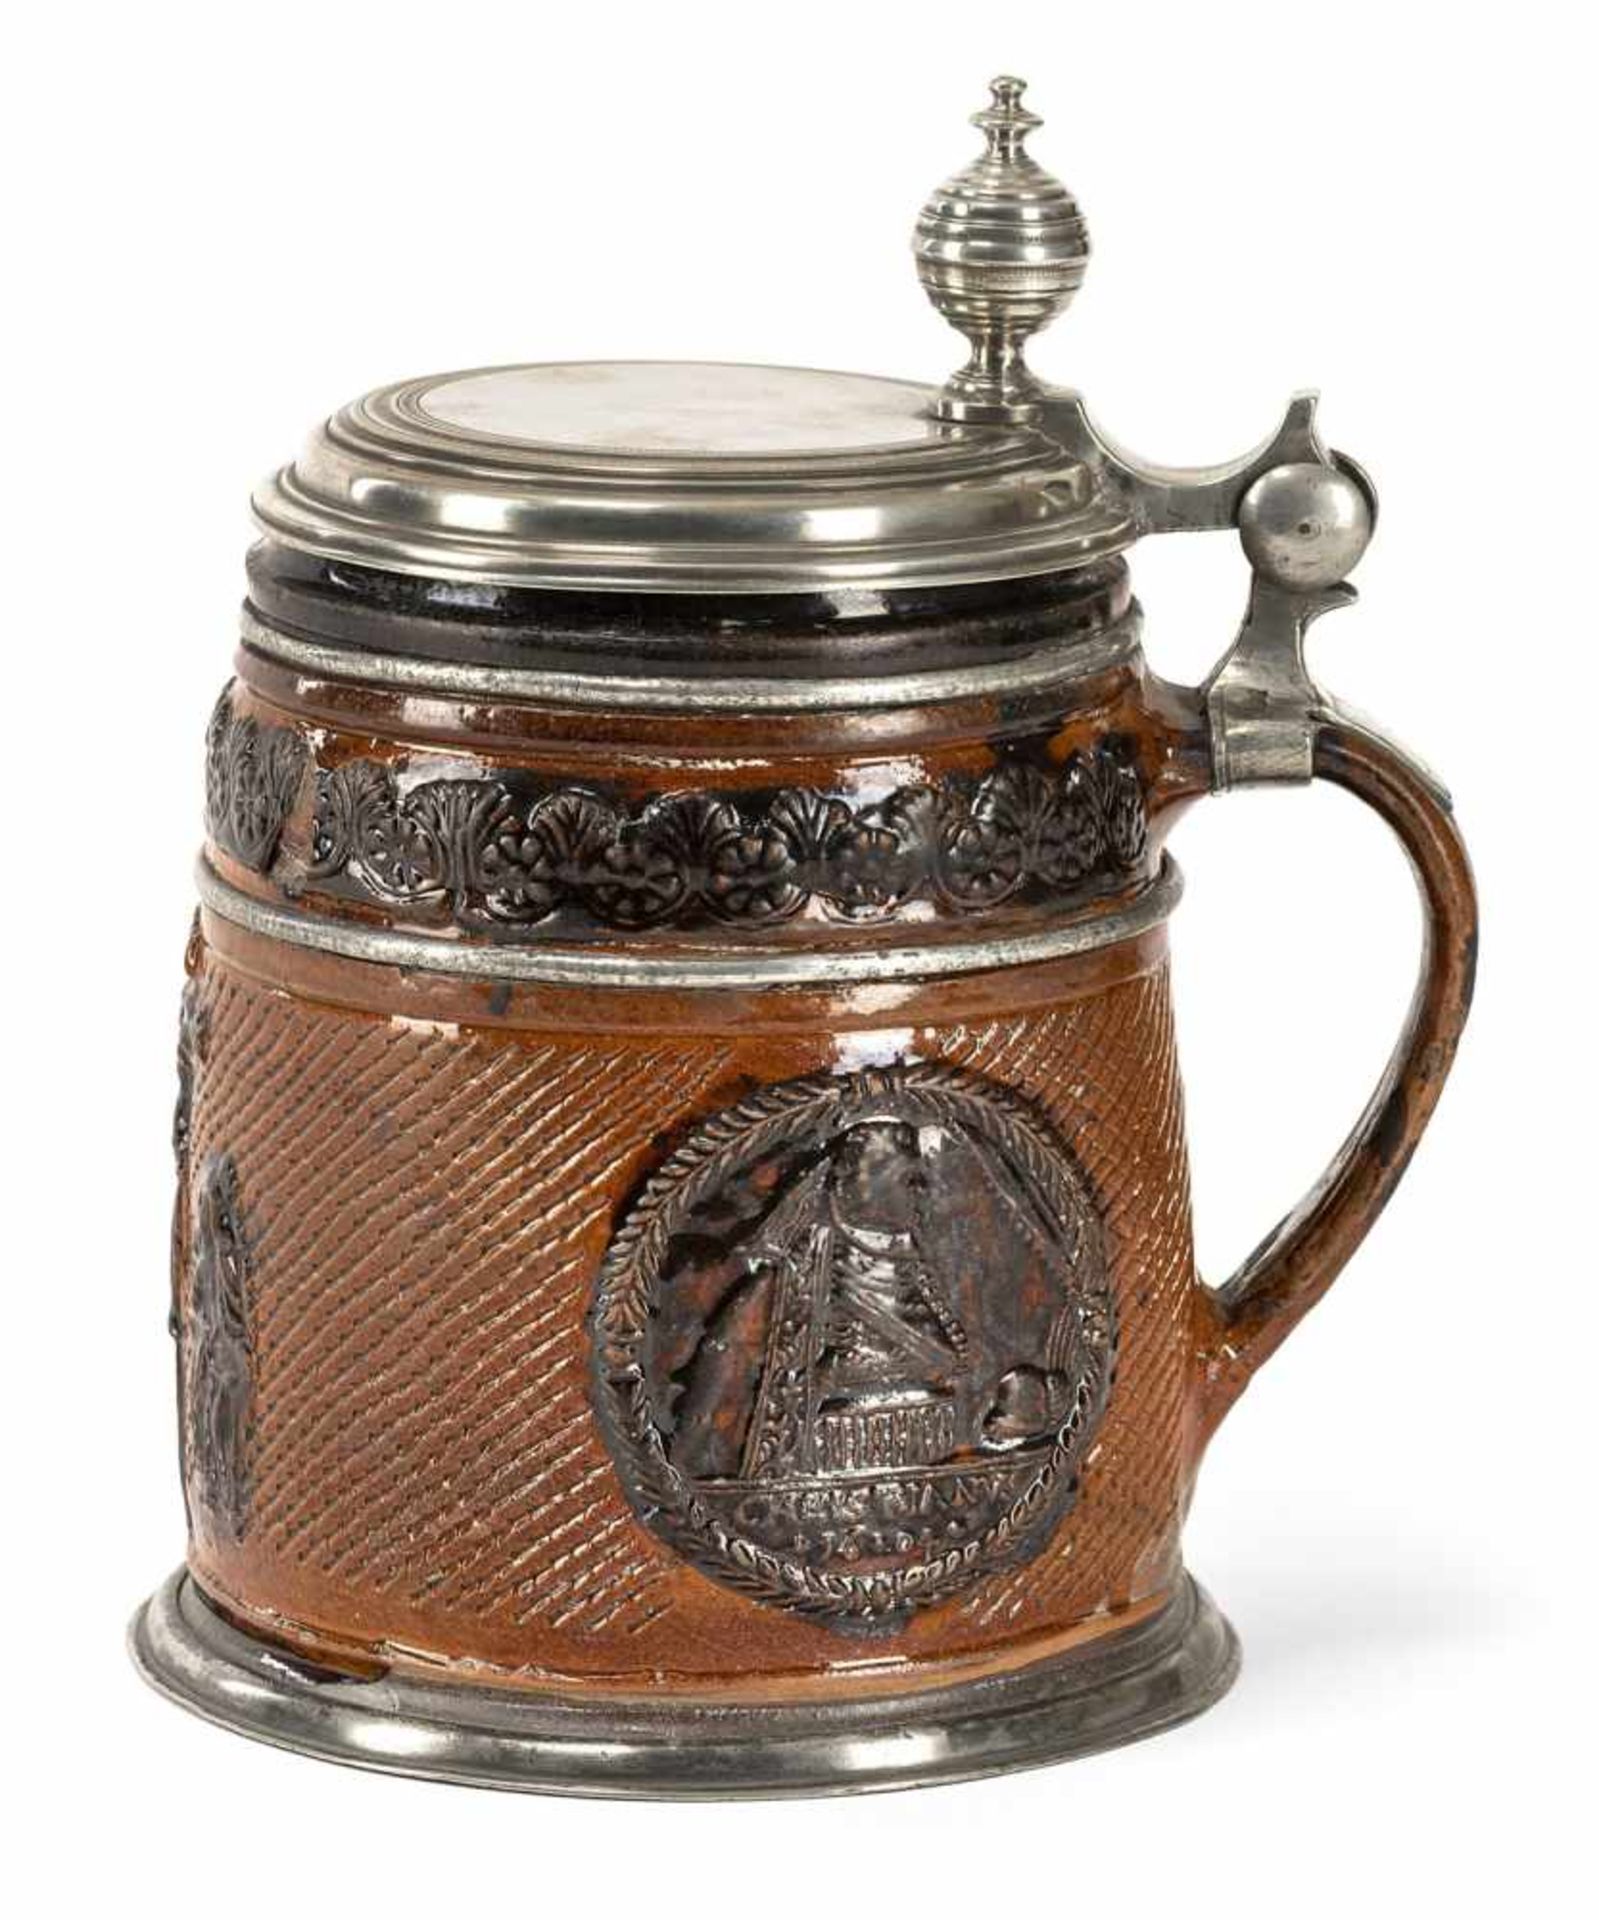 A BIG BROWN GLAZED STEIN, Saxony, 17th century. With relief shaped crucifixtion group at the front